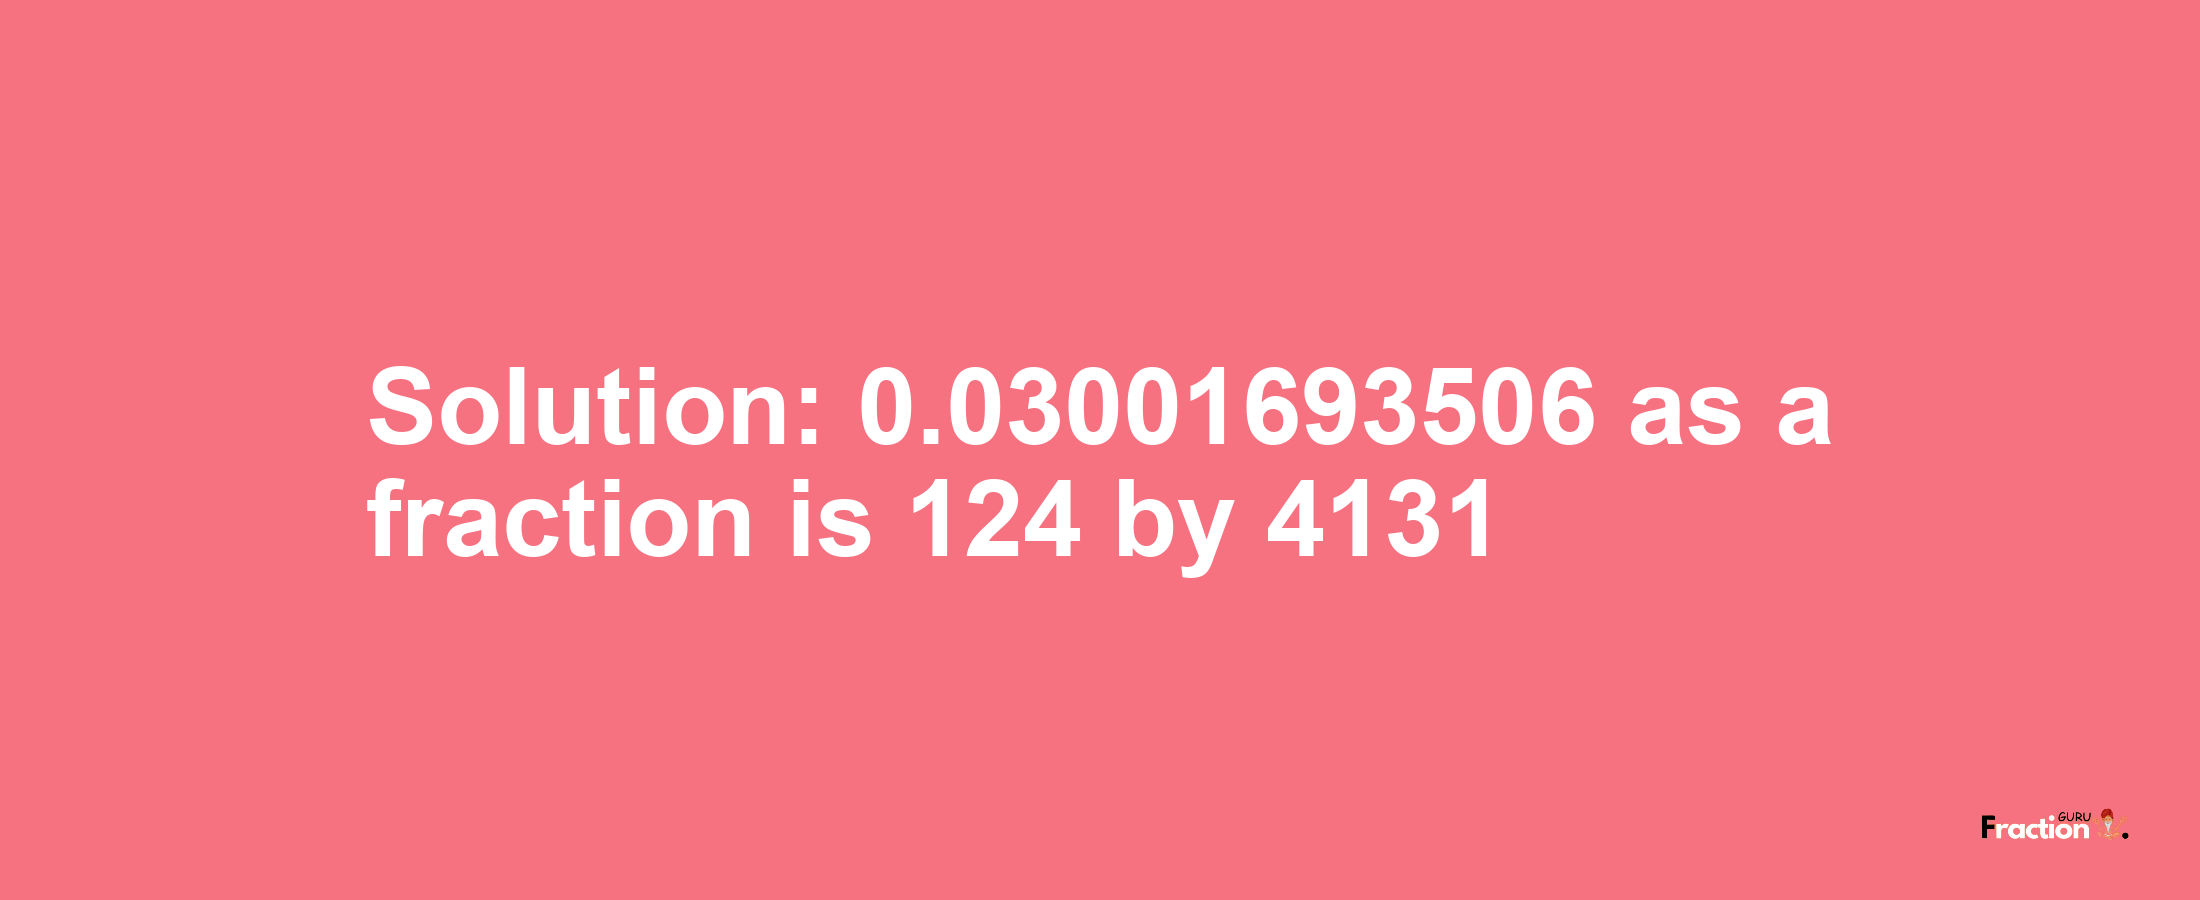 Solution:0.03001693506 as a fraction is 124/4131